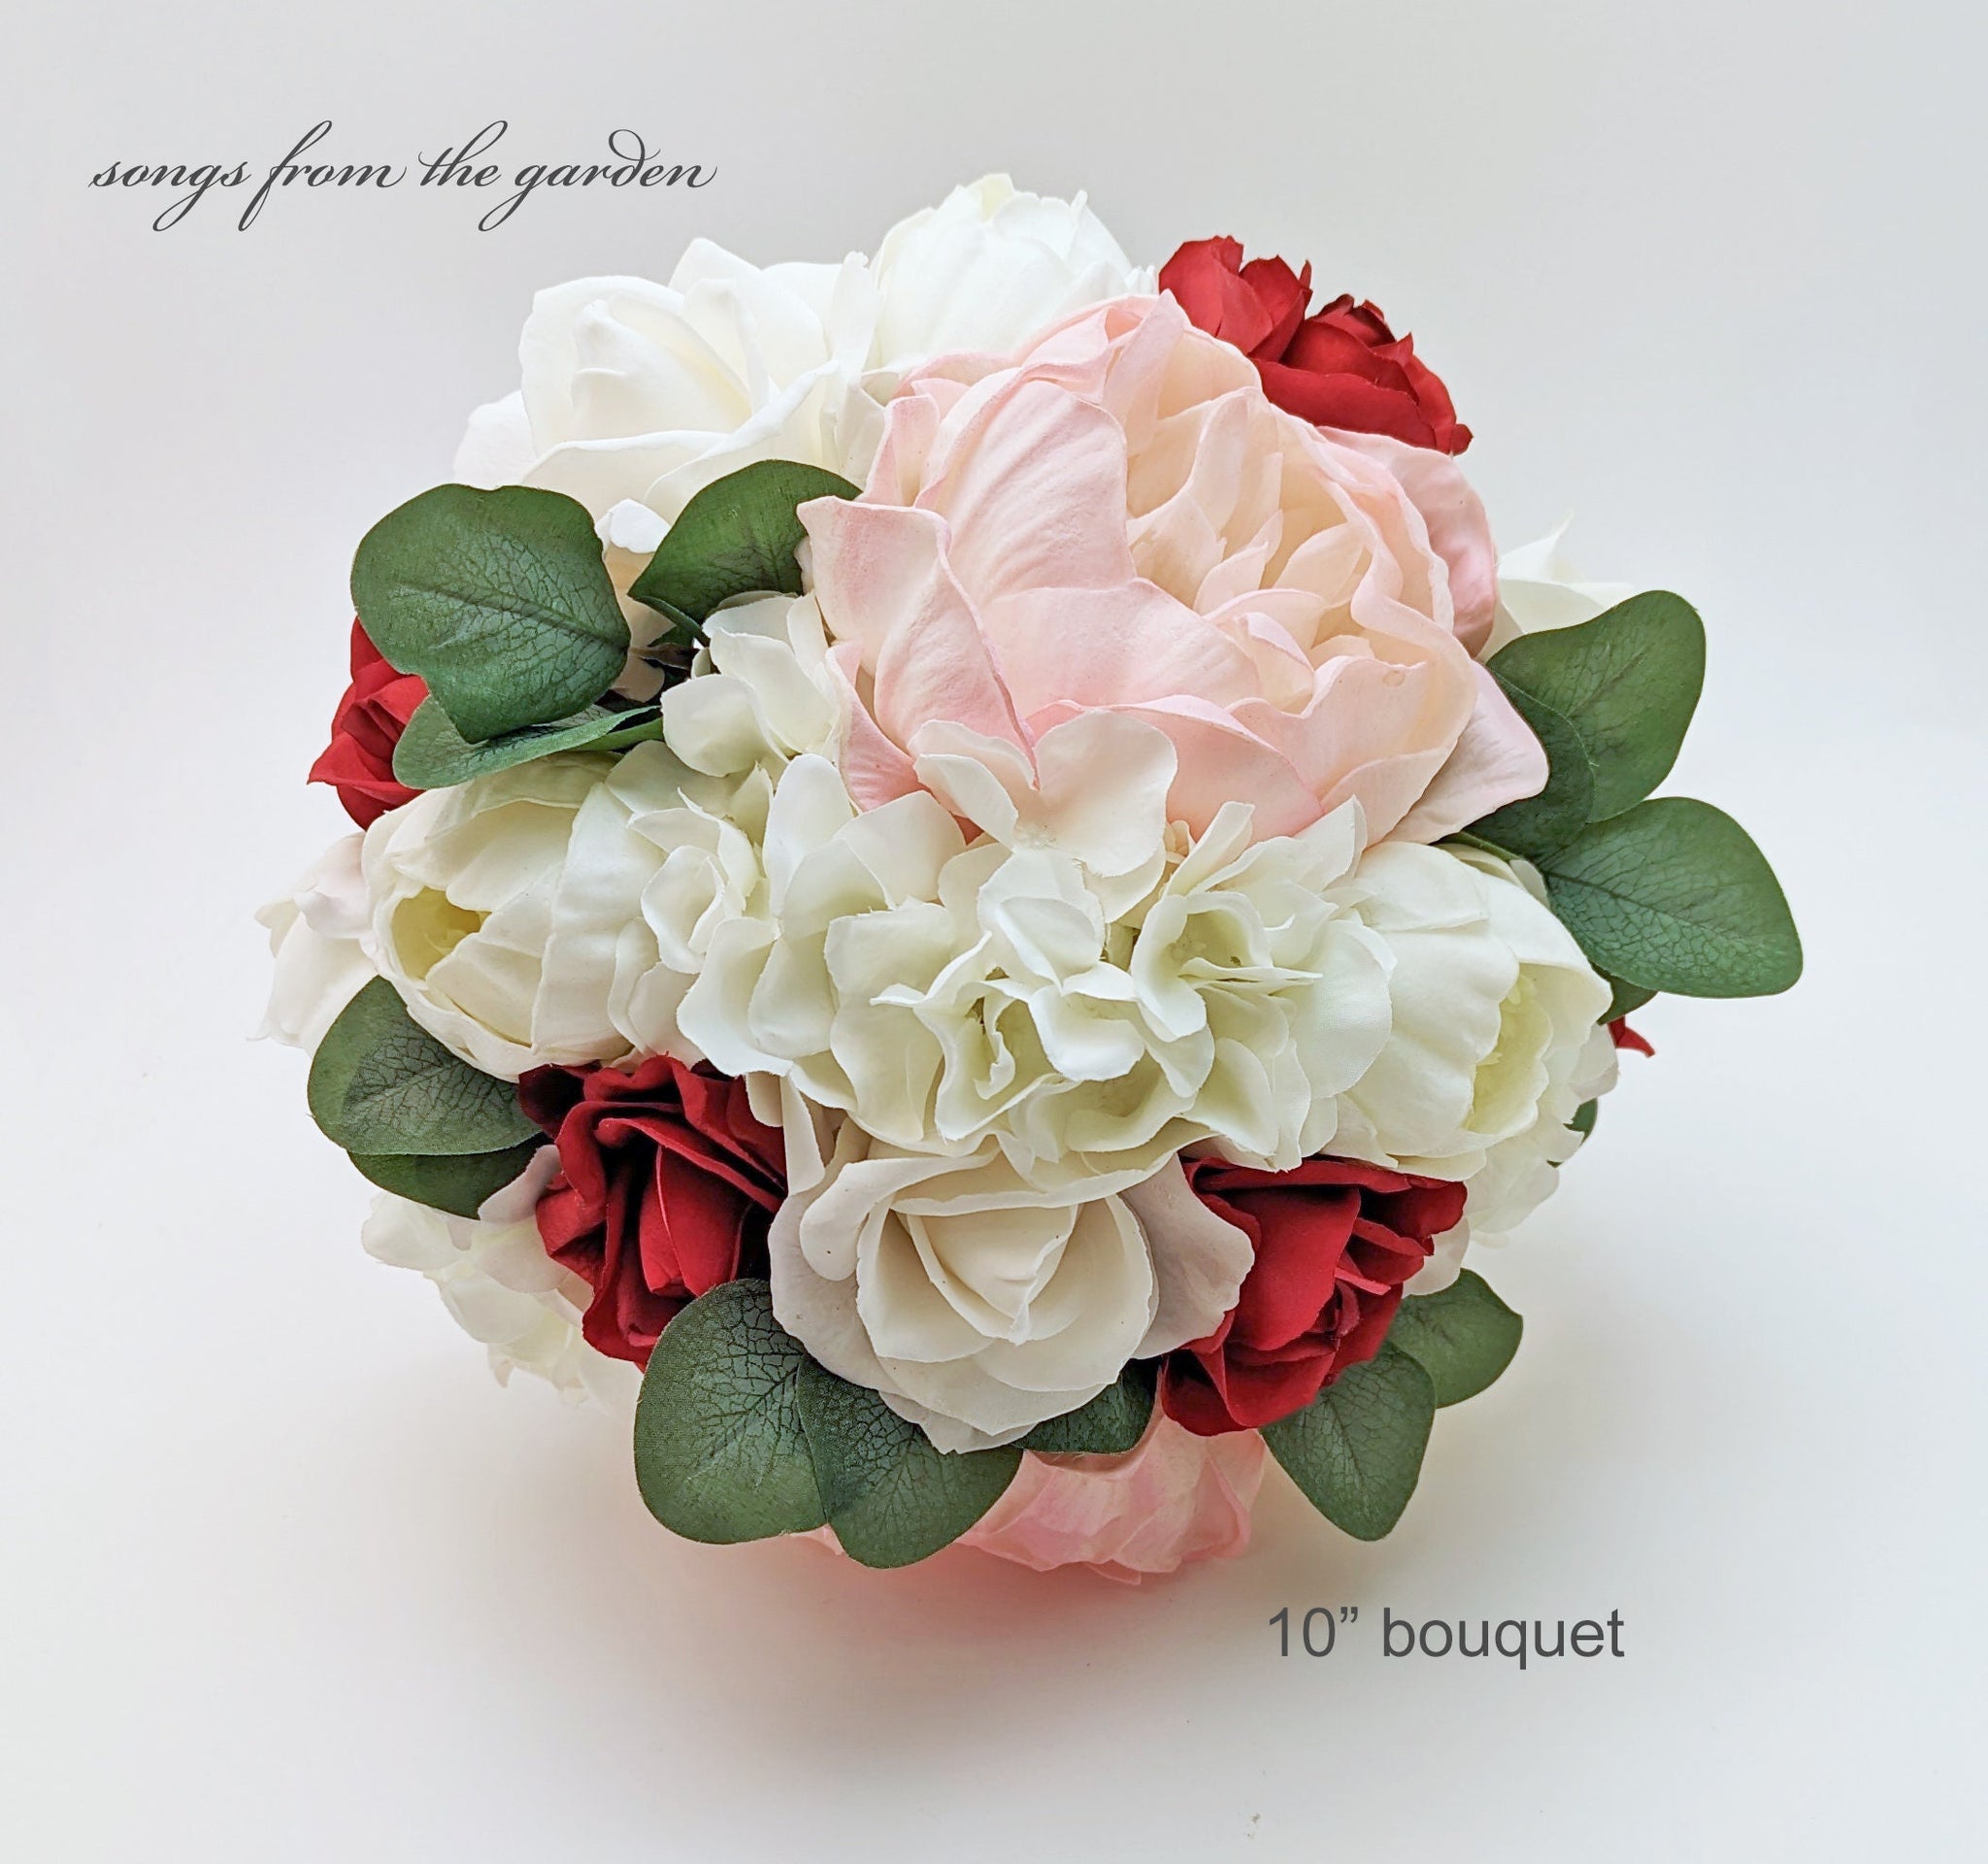 Blush Red Bridal or Bridesmaid Bouquet Eucalyptus Peonies Roses - Add Groom's Boutonniere Corsage Wedding Centerpiece Crown & More!